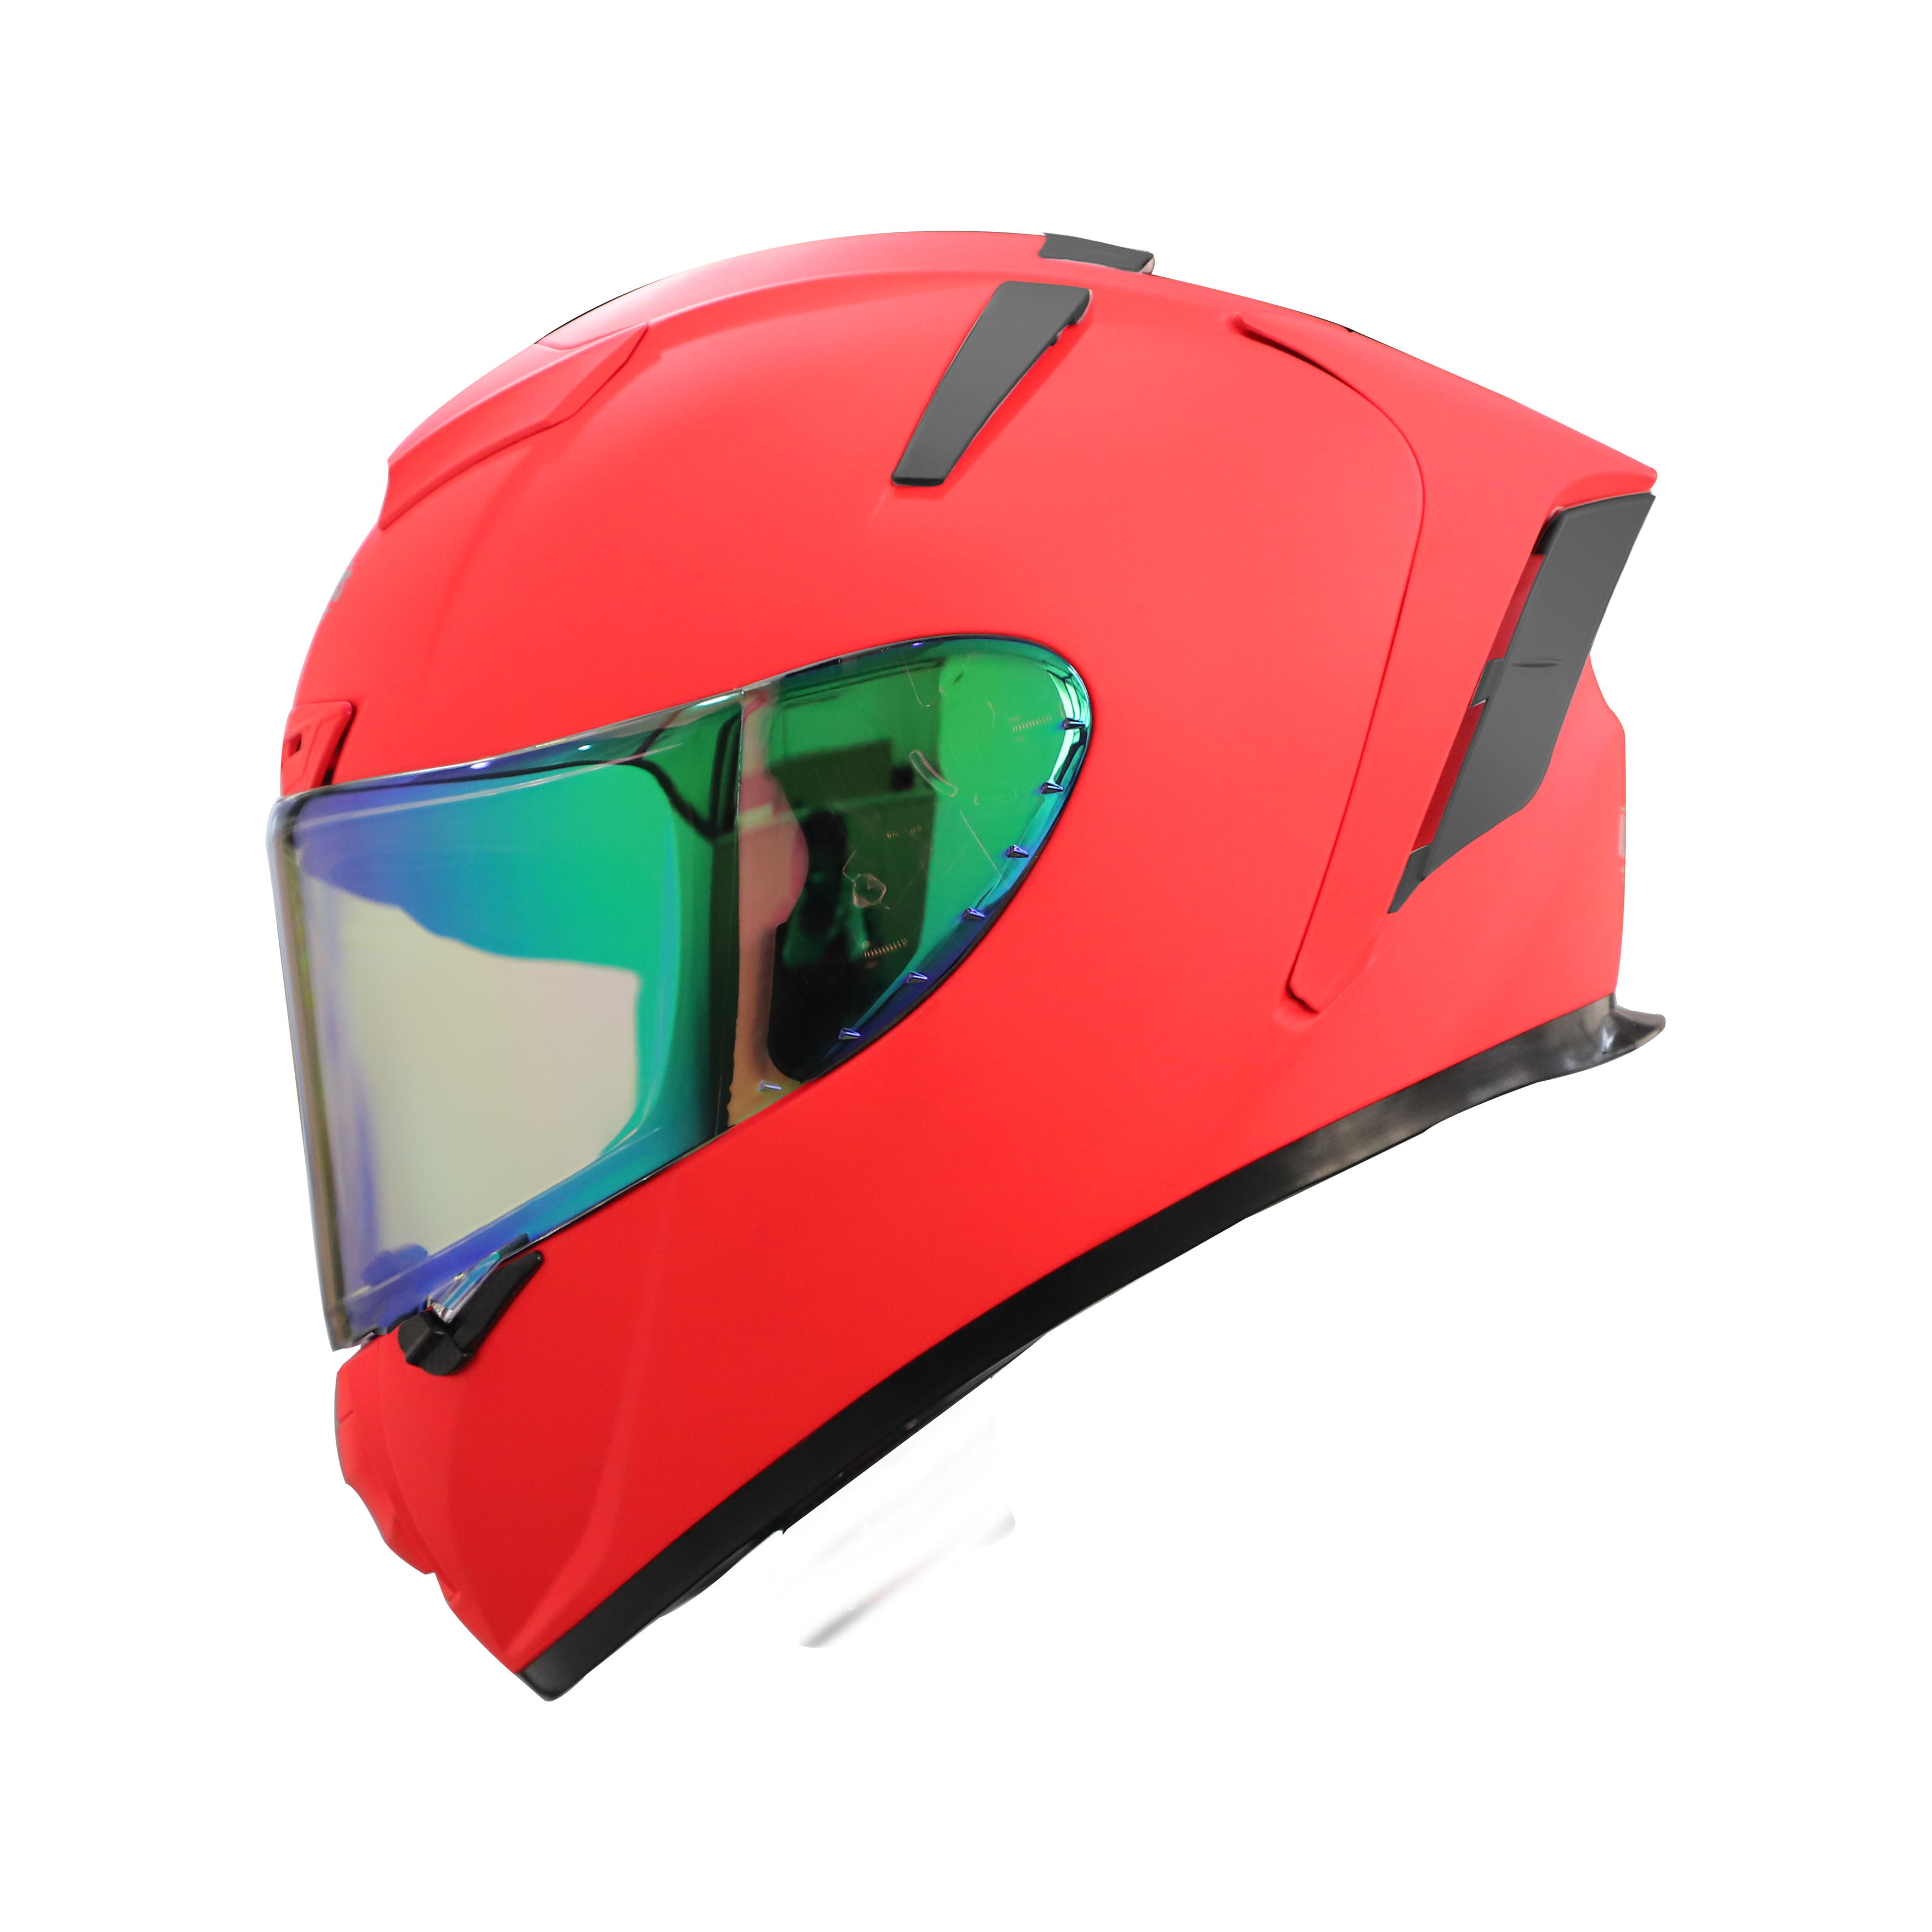 SA-2 GLOSSY FLUO WATERMELON (FITTED WITH CLEAR VISOR WITH EXTRA NIGHT VISION GREEN VISOR FREE)